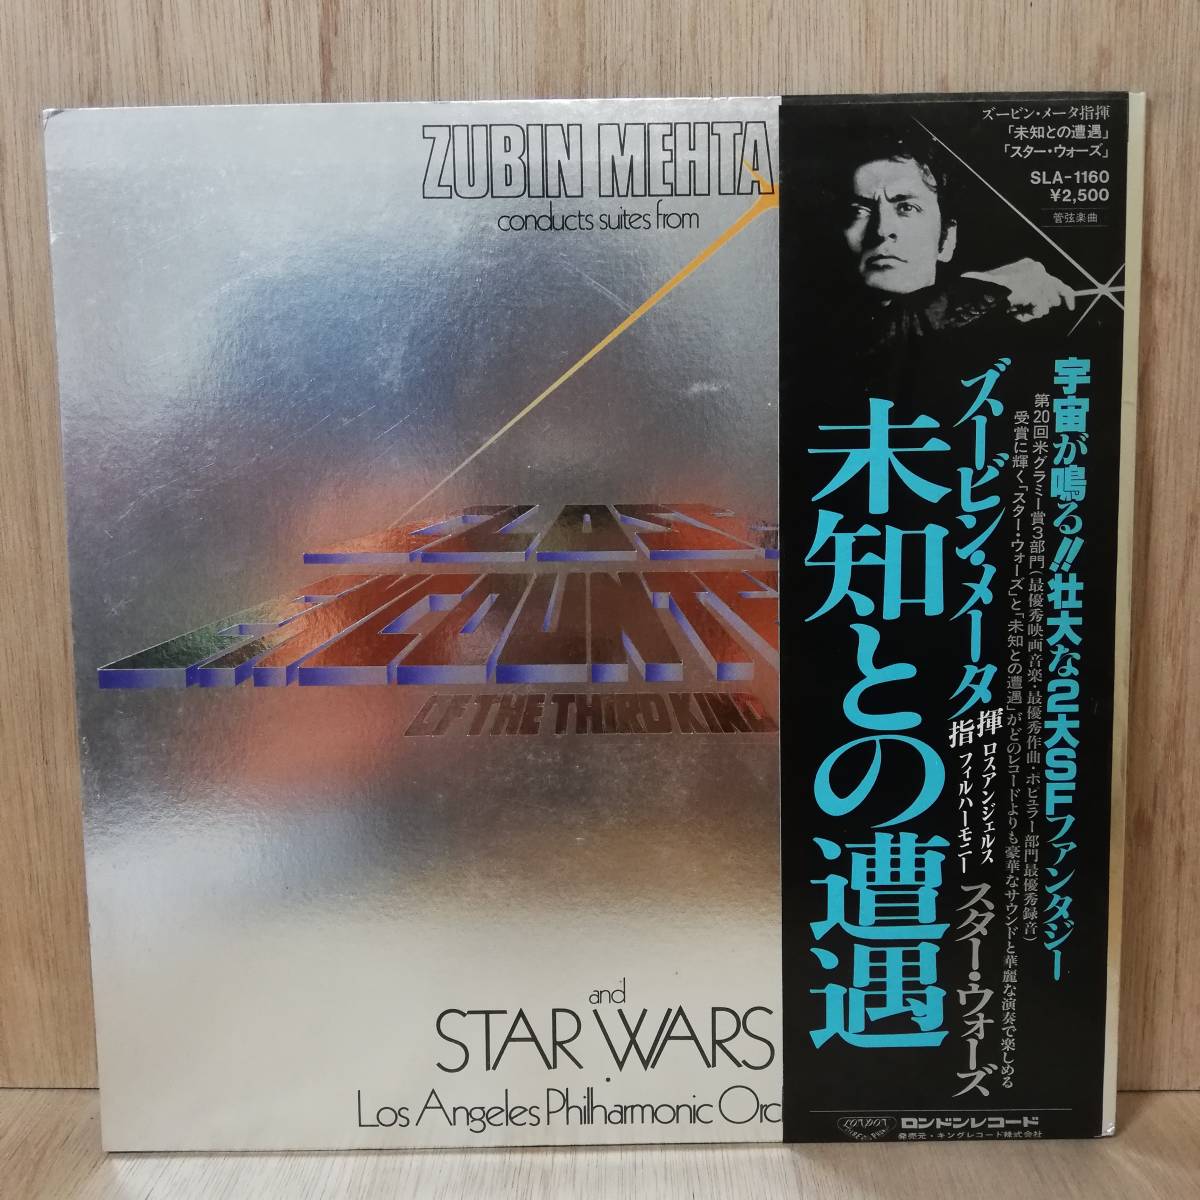 【LP】Zubin Mehta Conducts Los Angeles Phil Suites From Star Wars And Close Encounters Of The Third Kind - SLA 1160 - *15_画像2